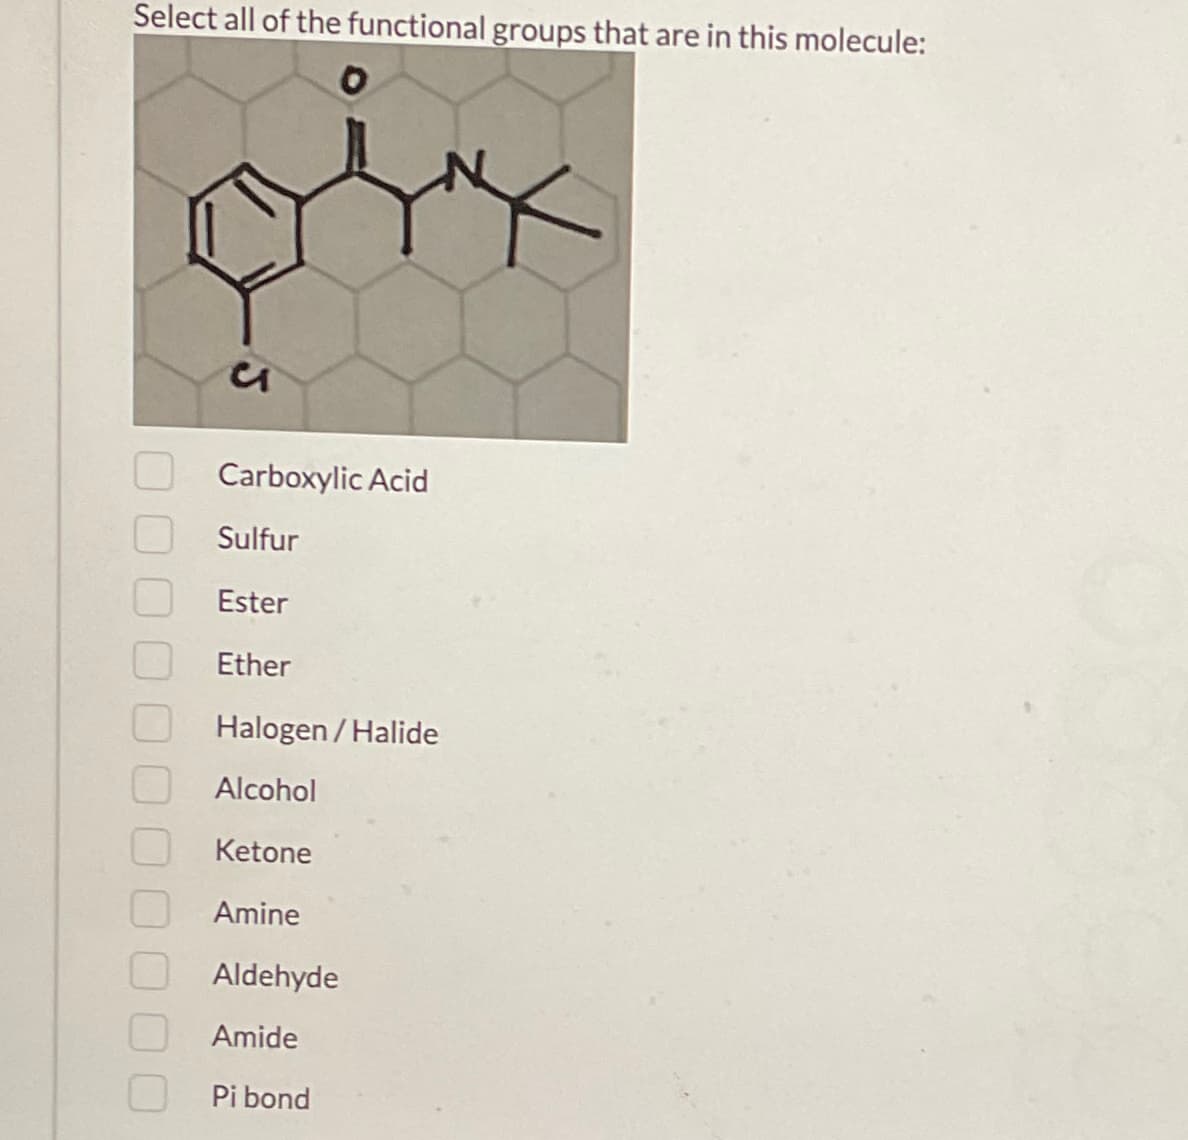 Select all of the functional groups that are in this molecule:
и
Carboxylic Acid
Sulfur
Ester
Ether
Halogen/Halide
Alcohol
Ketone
Amine
Aldehyde
Amide
Pi bond